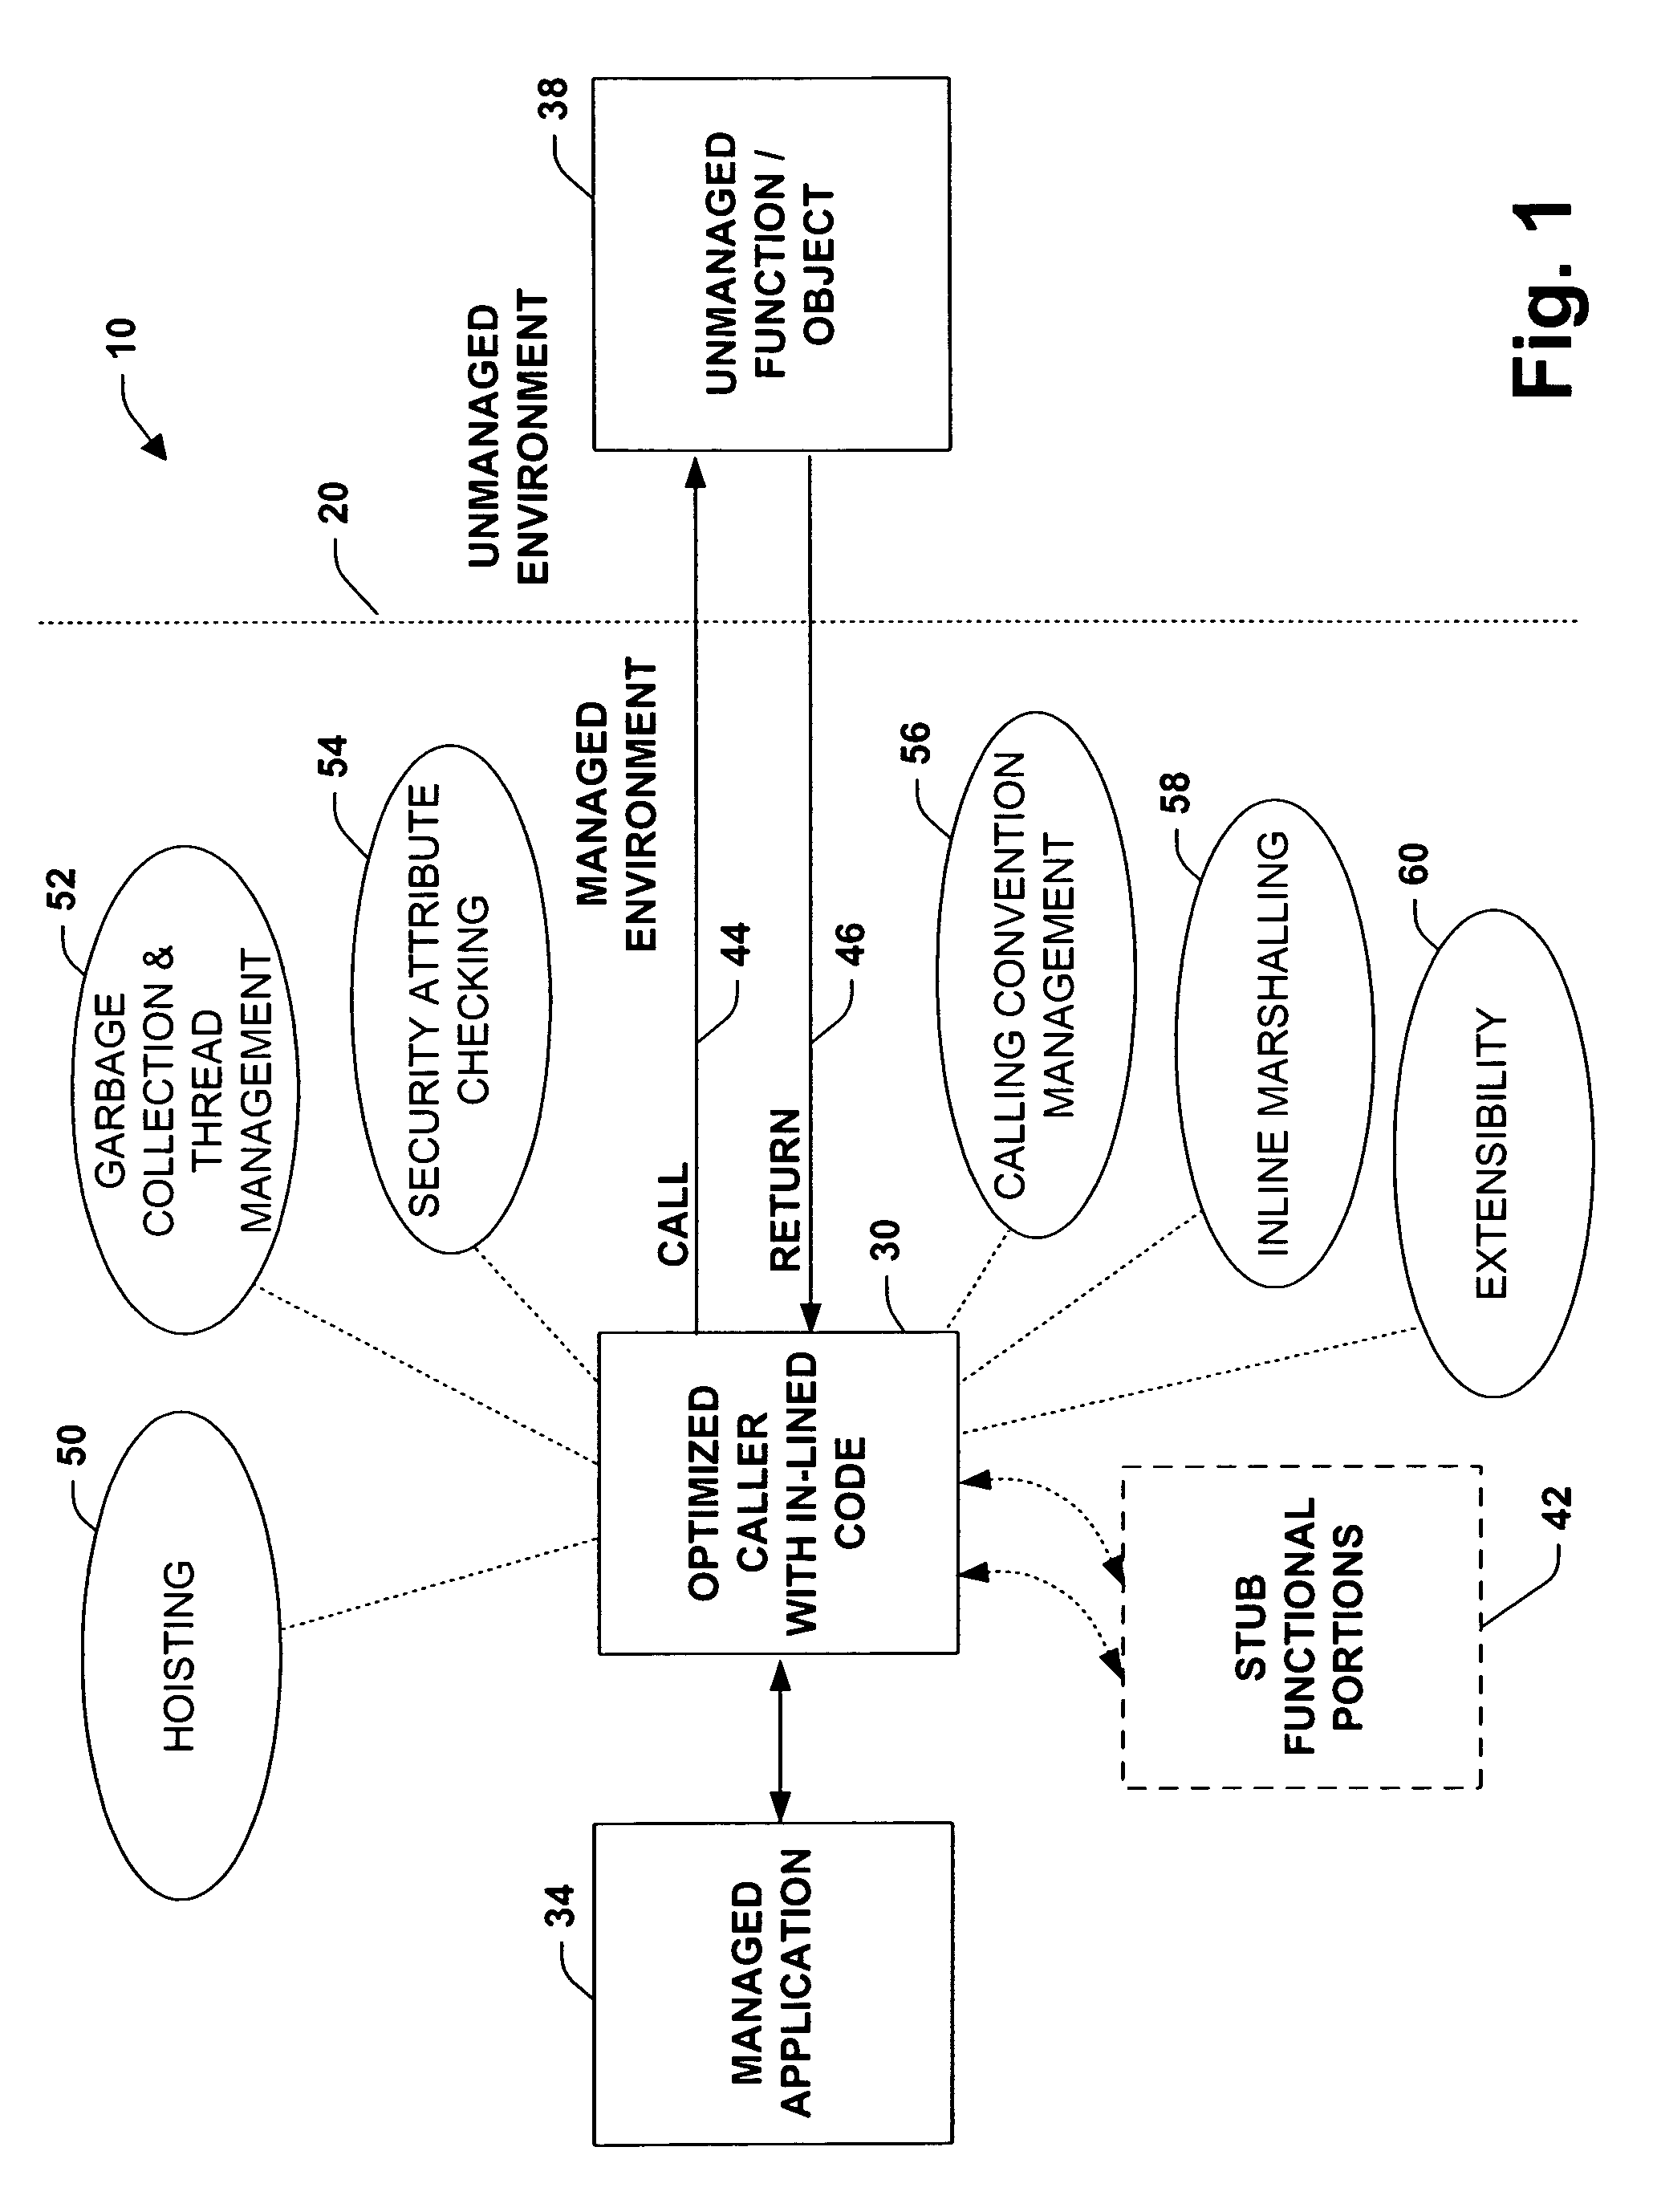 System and method providing inlined stub